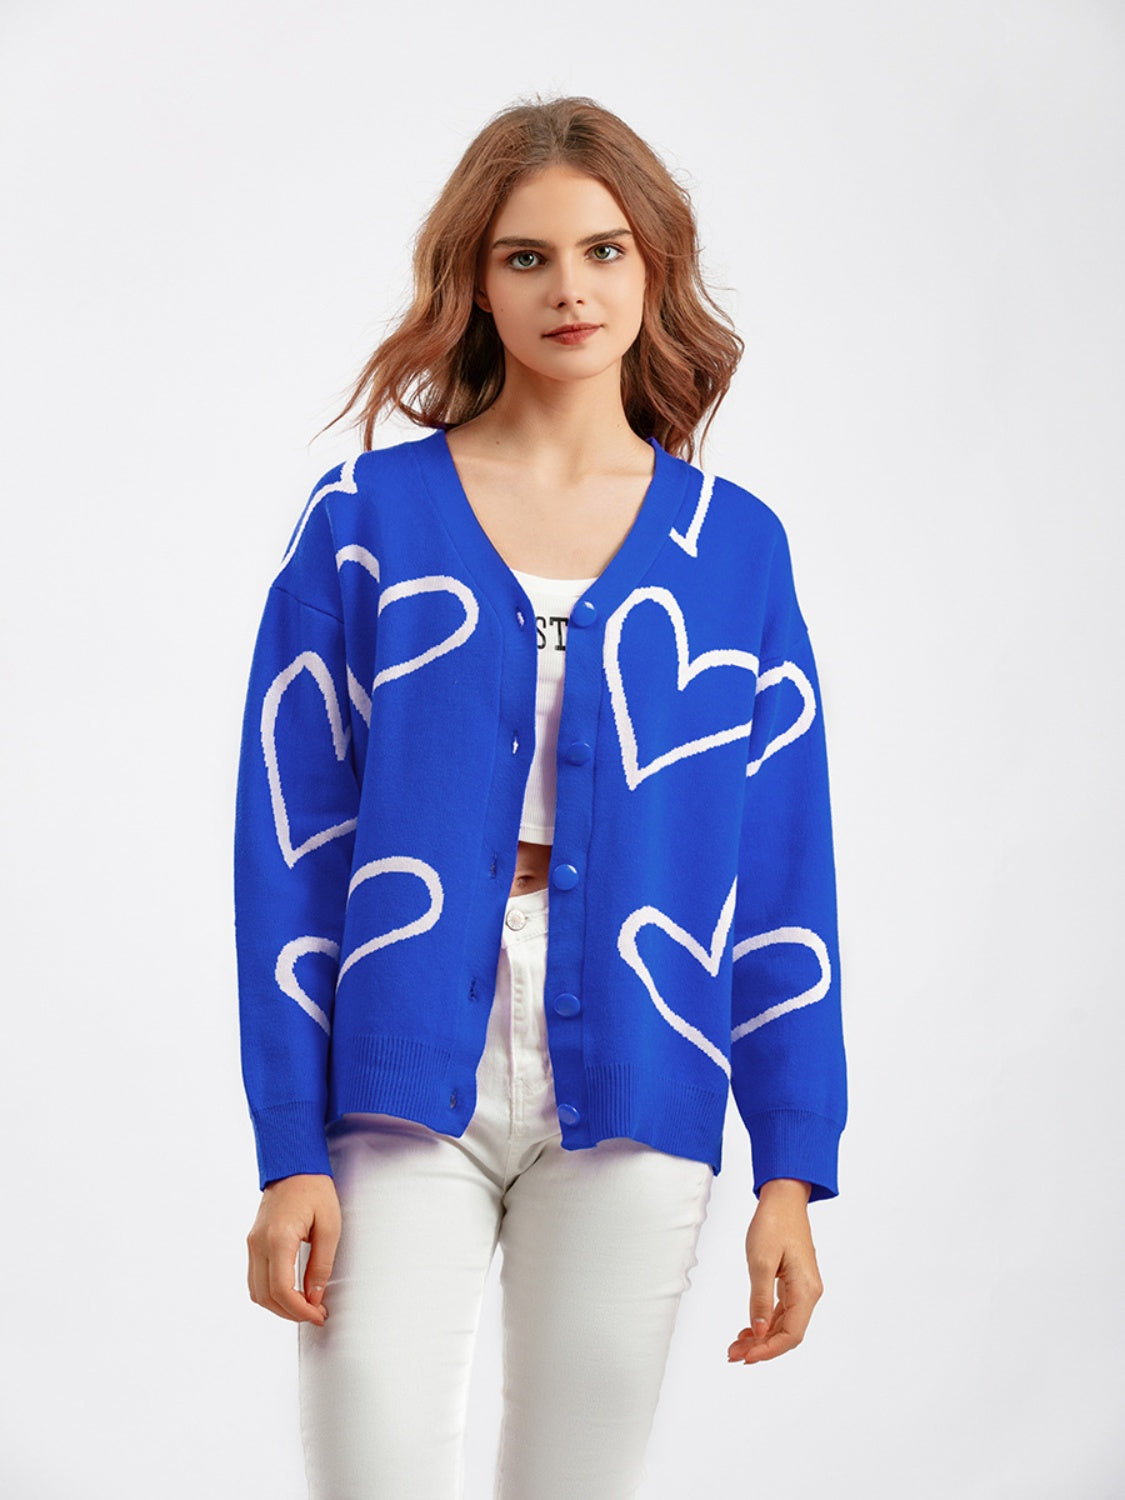 Heart Button Down Cardigan - Blue / One Size - Women’s Clothing & Accessories - Shirts & Tops - 13 - 2024